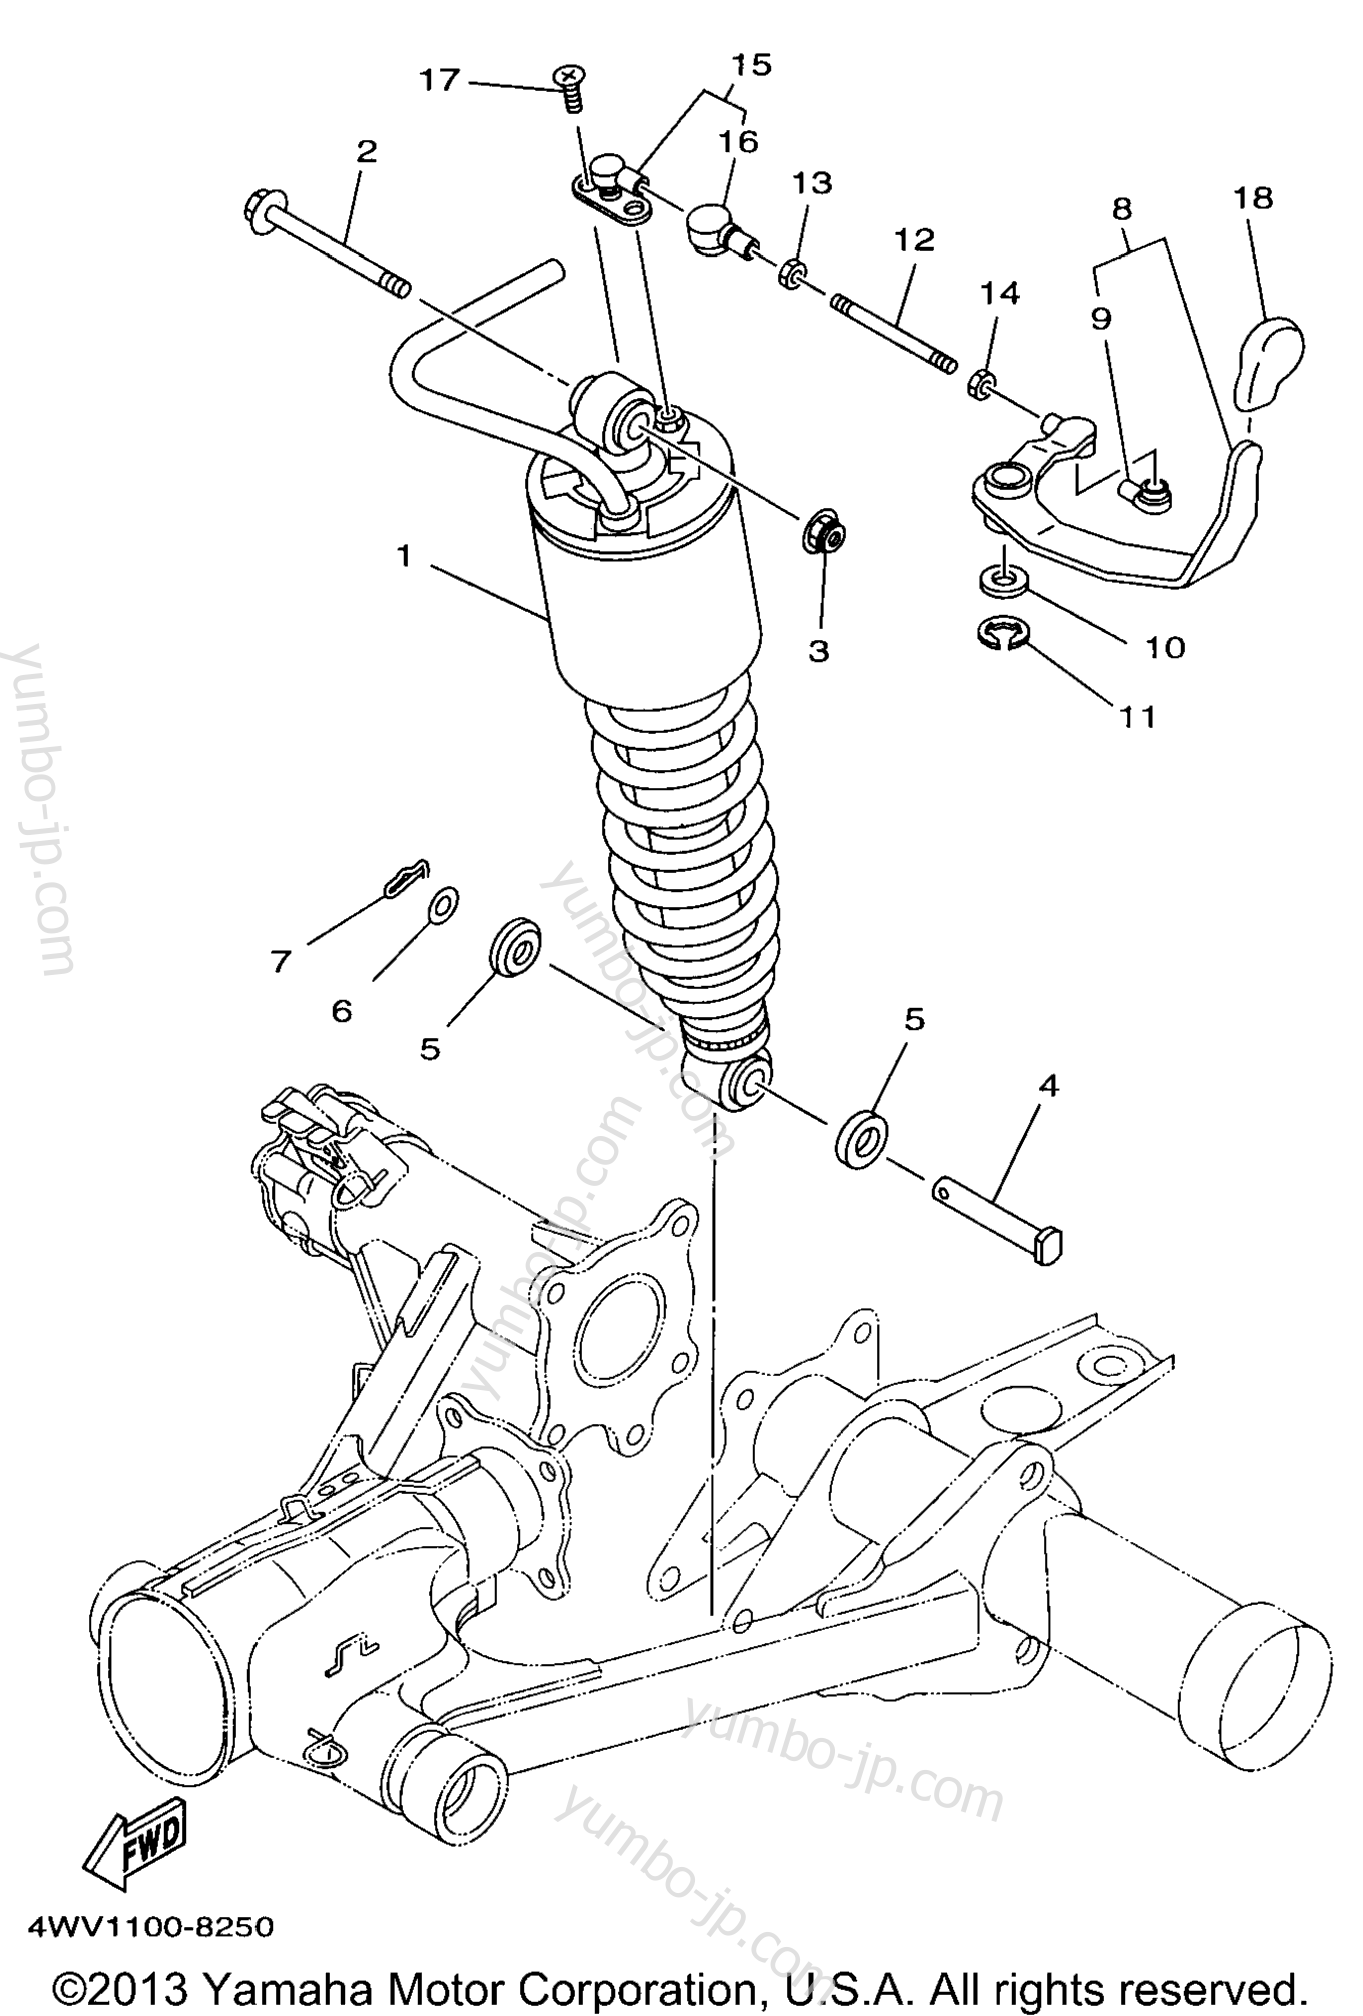 Rear Suspension for ATVs YAMAHA GRIZZLY (YFM600FWAK) 1998 year